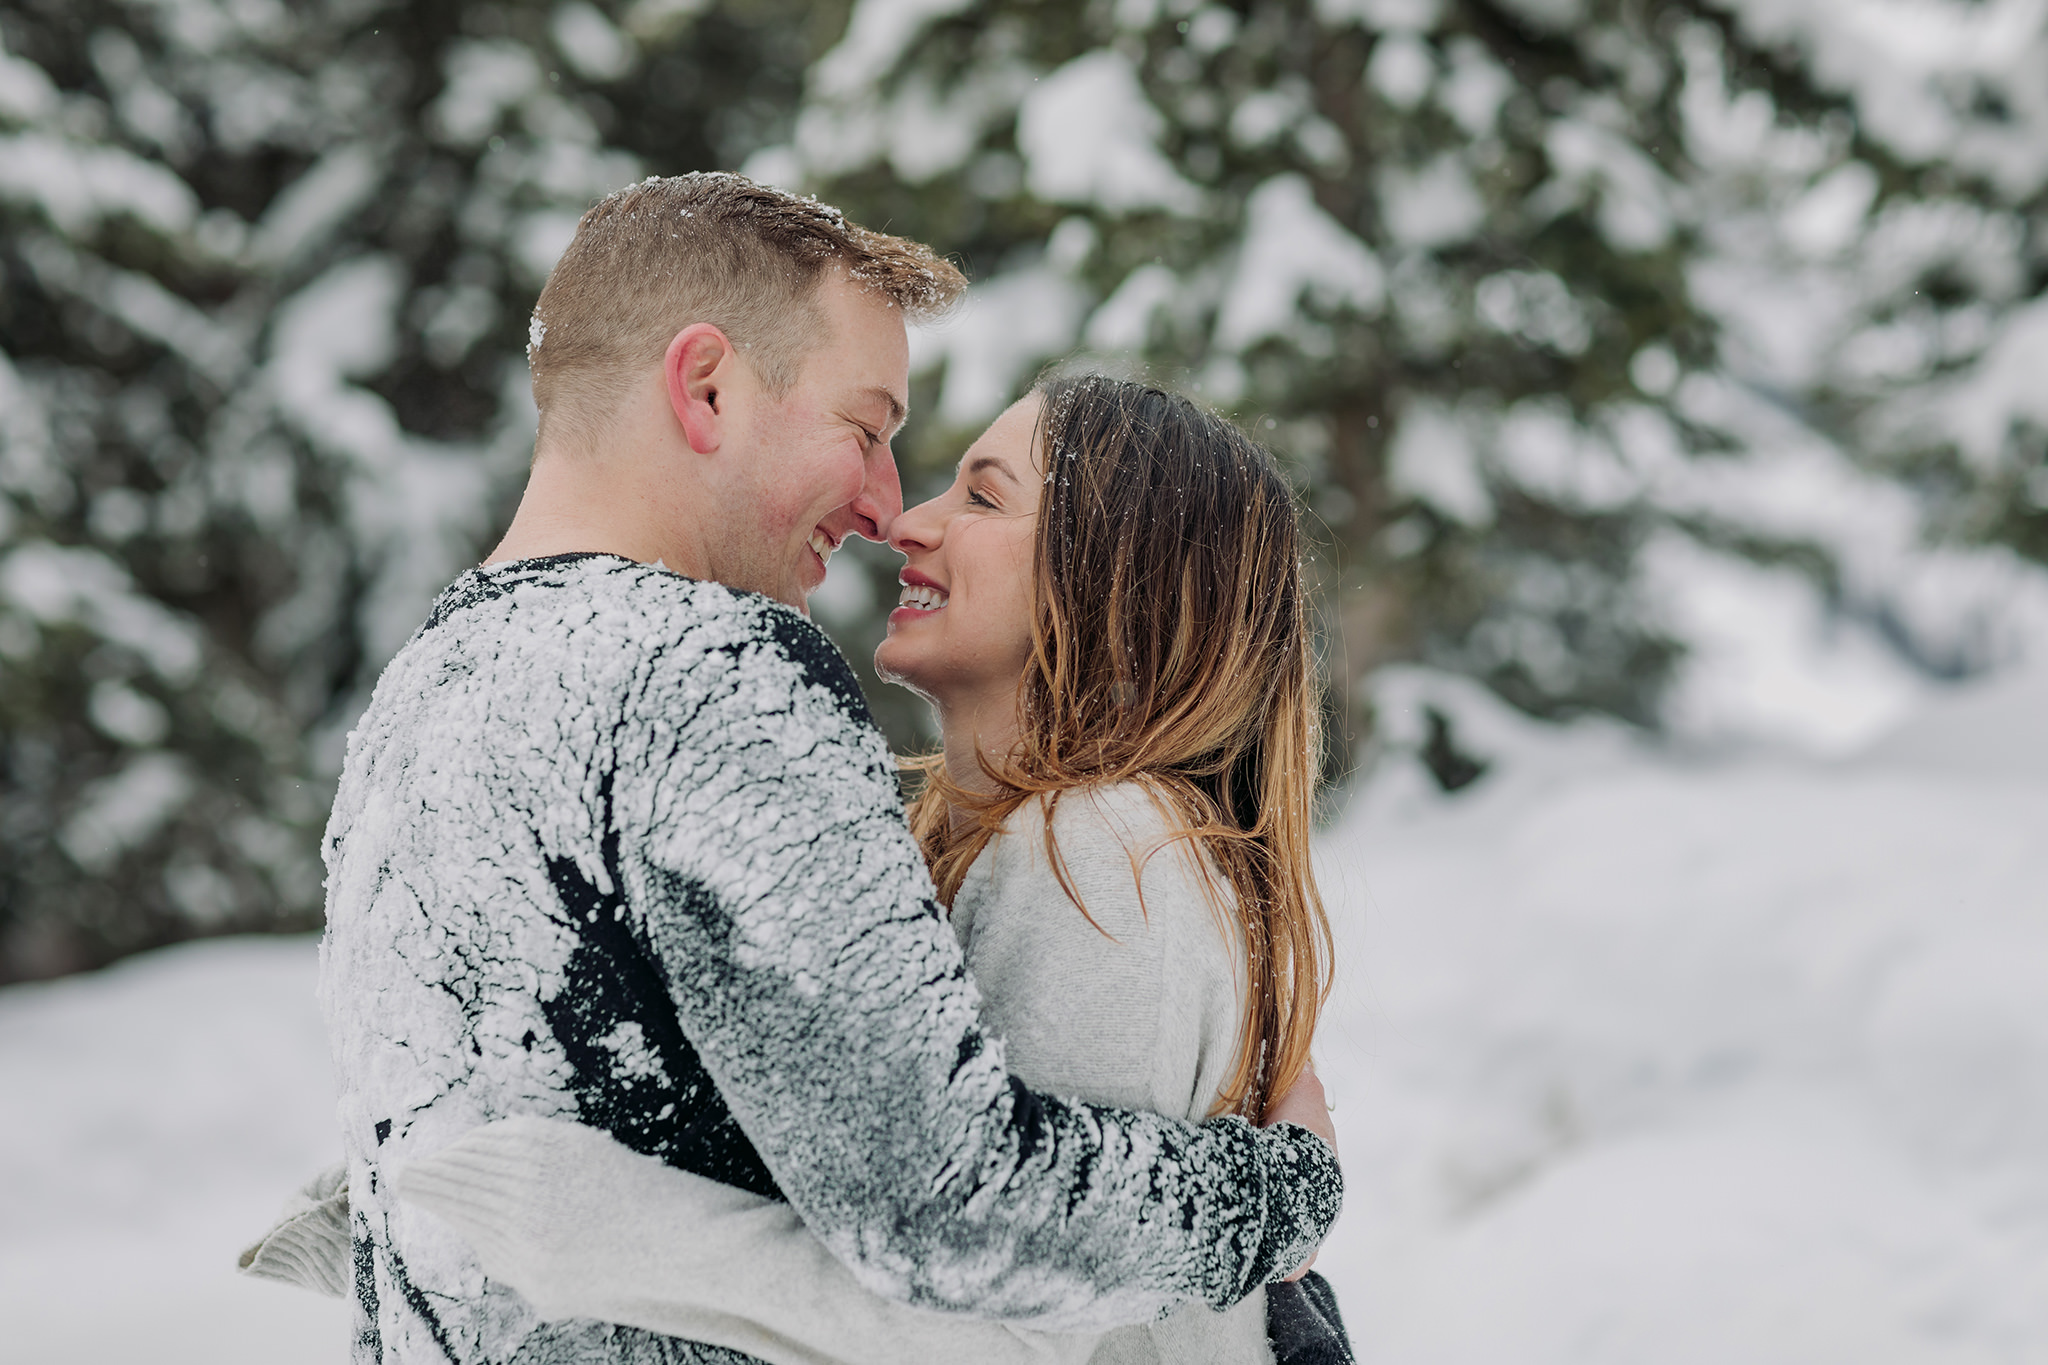 fun playful couples photos in the mountains snowy play fight in winter